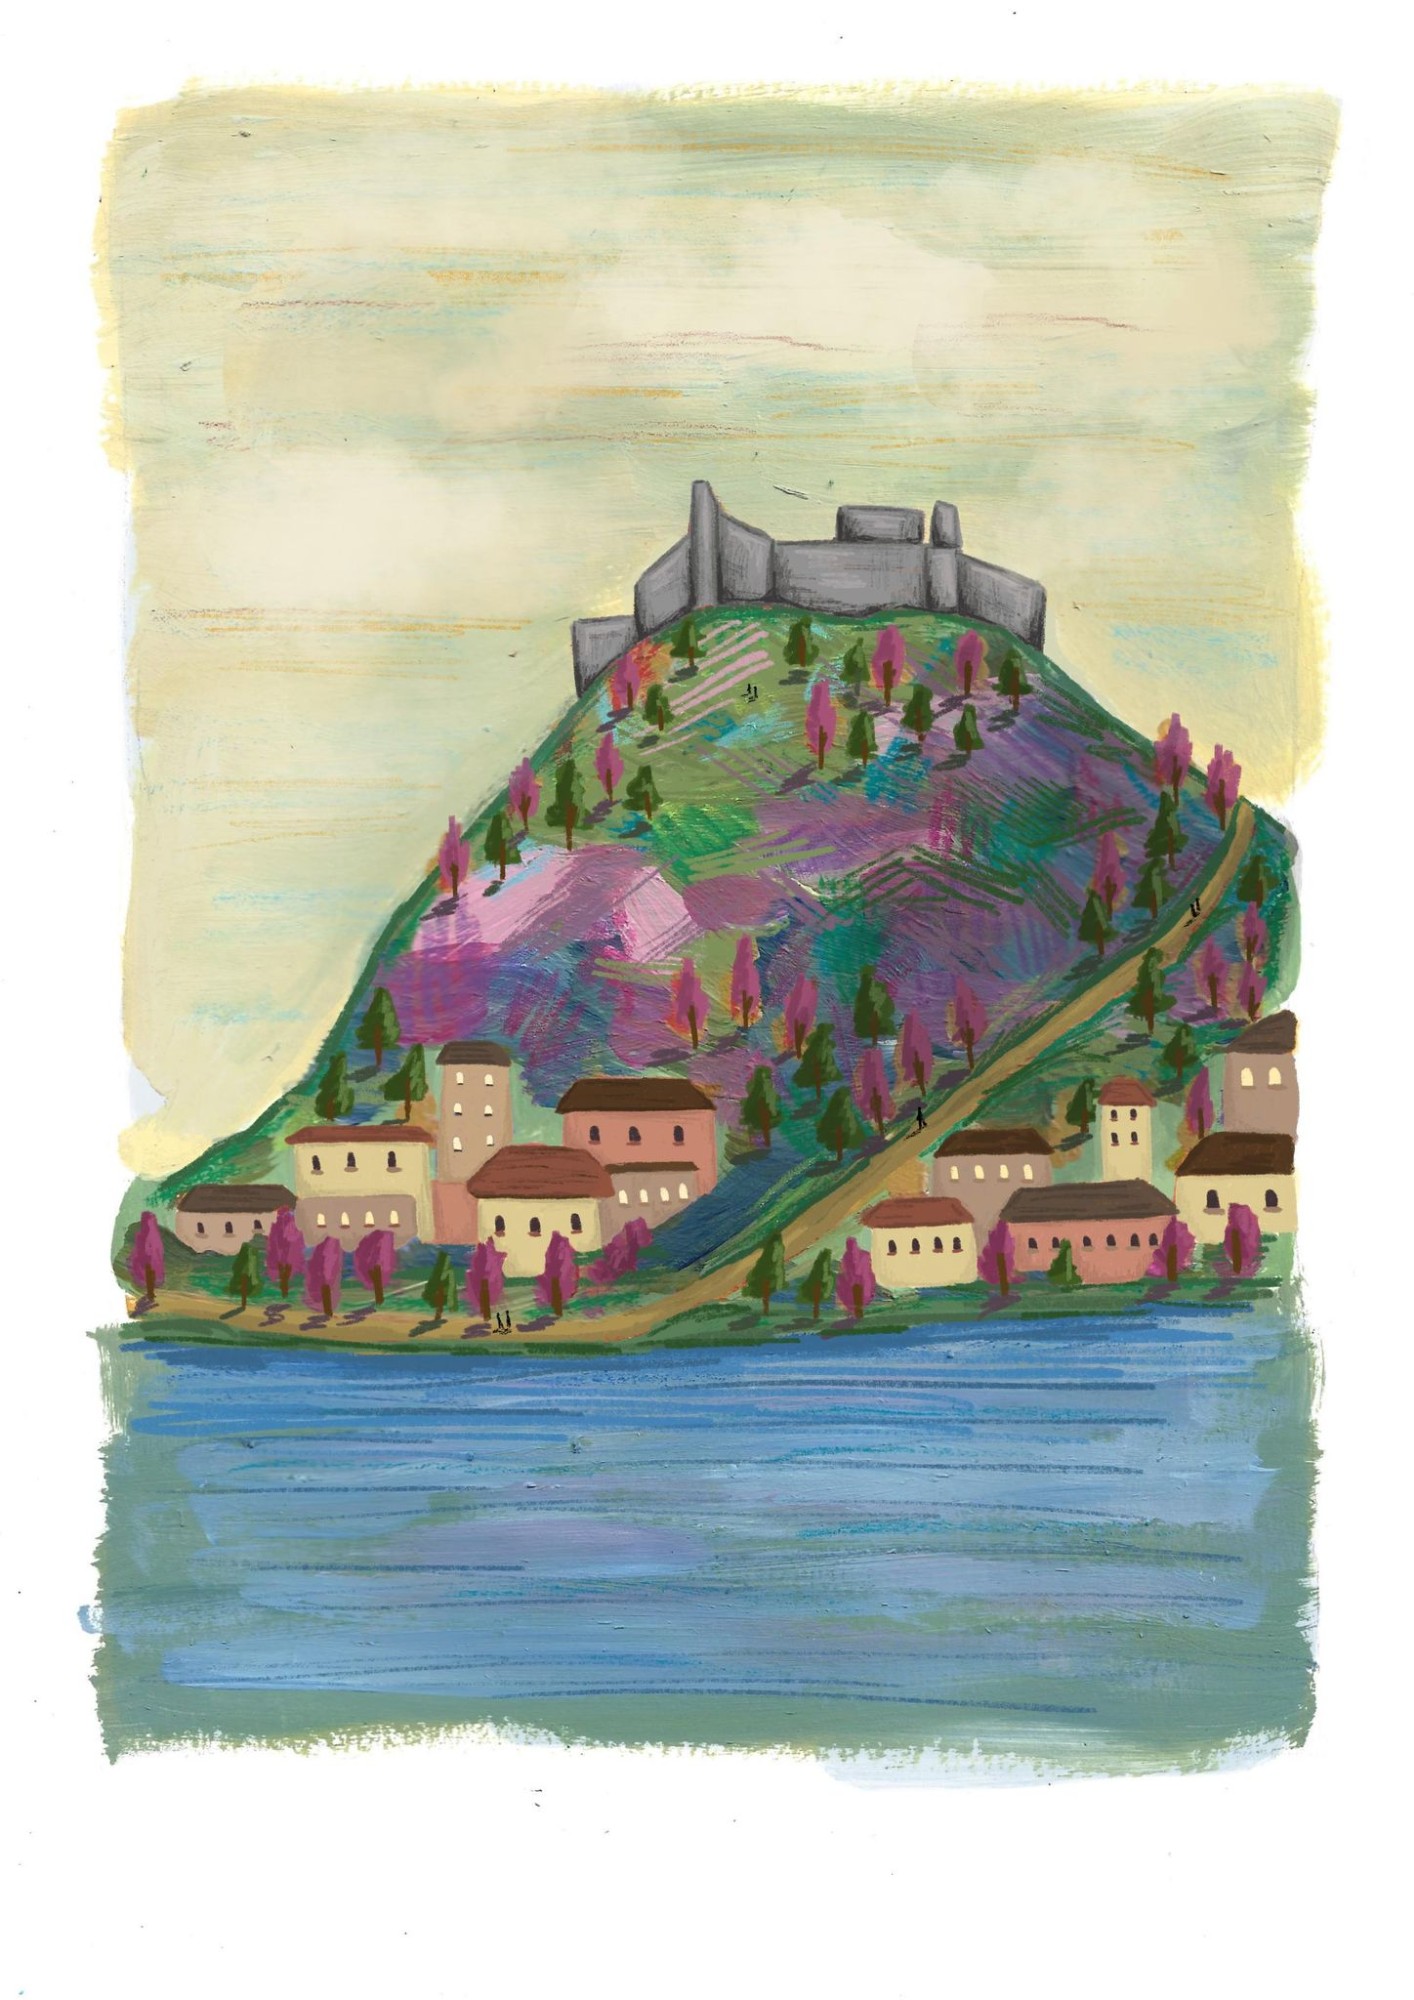 Hand painted and digital illustration of St Michael’s Mount